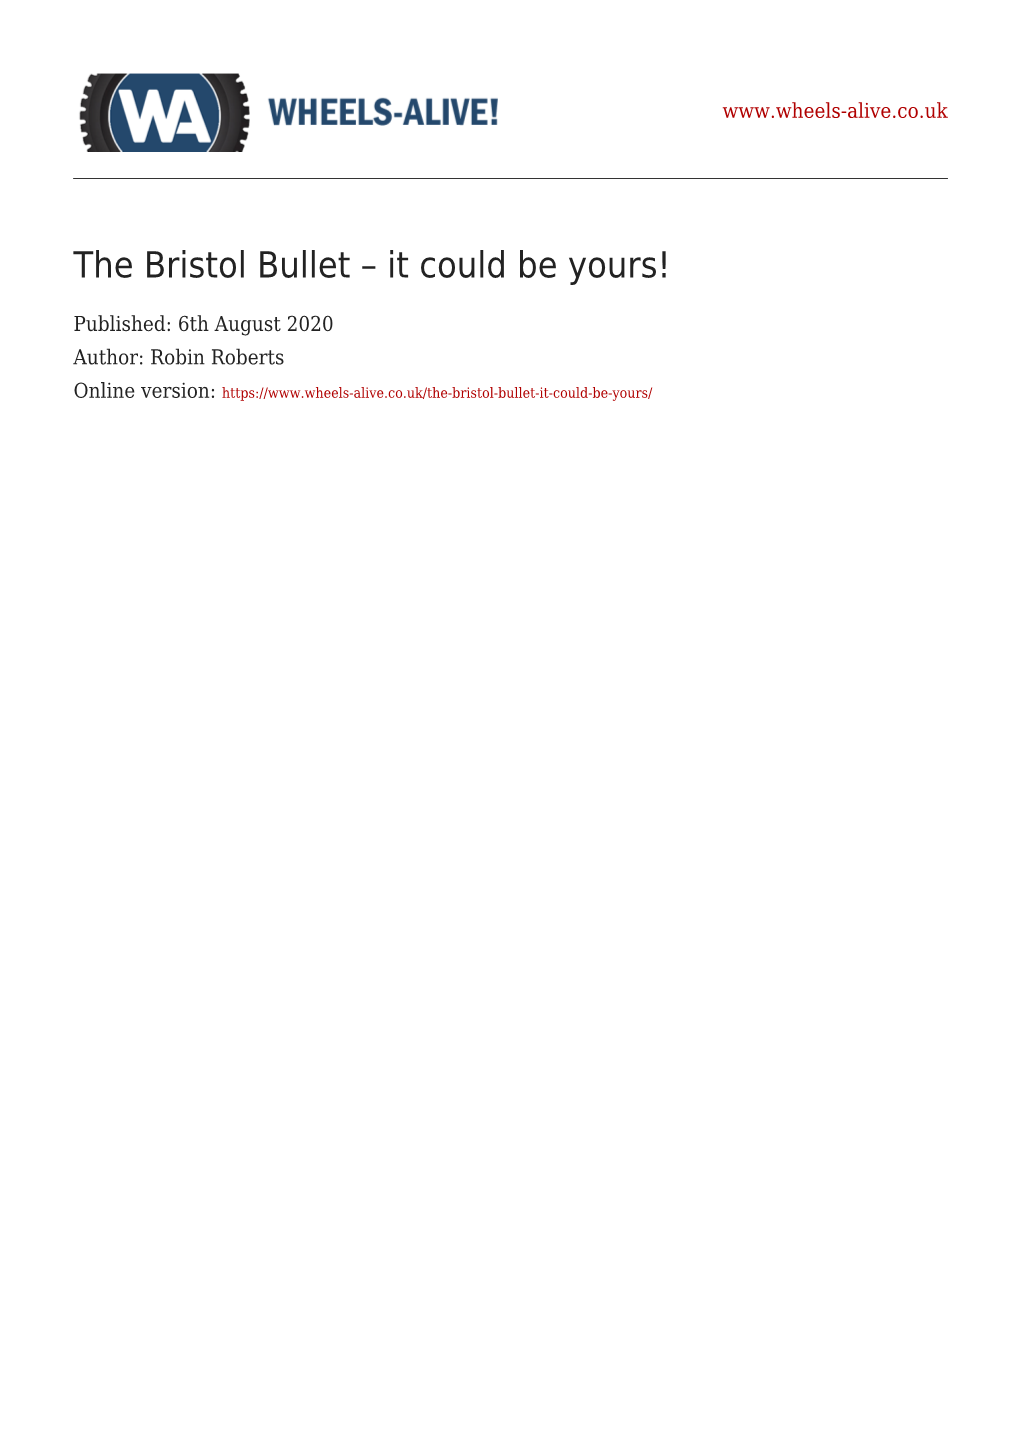 The Bristol Bullet – It Could Be Yours!